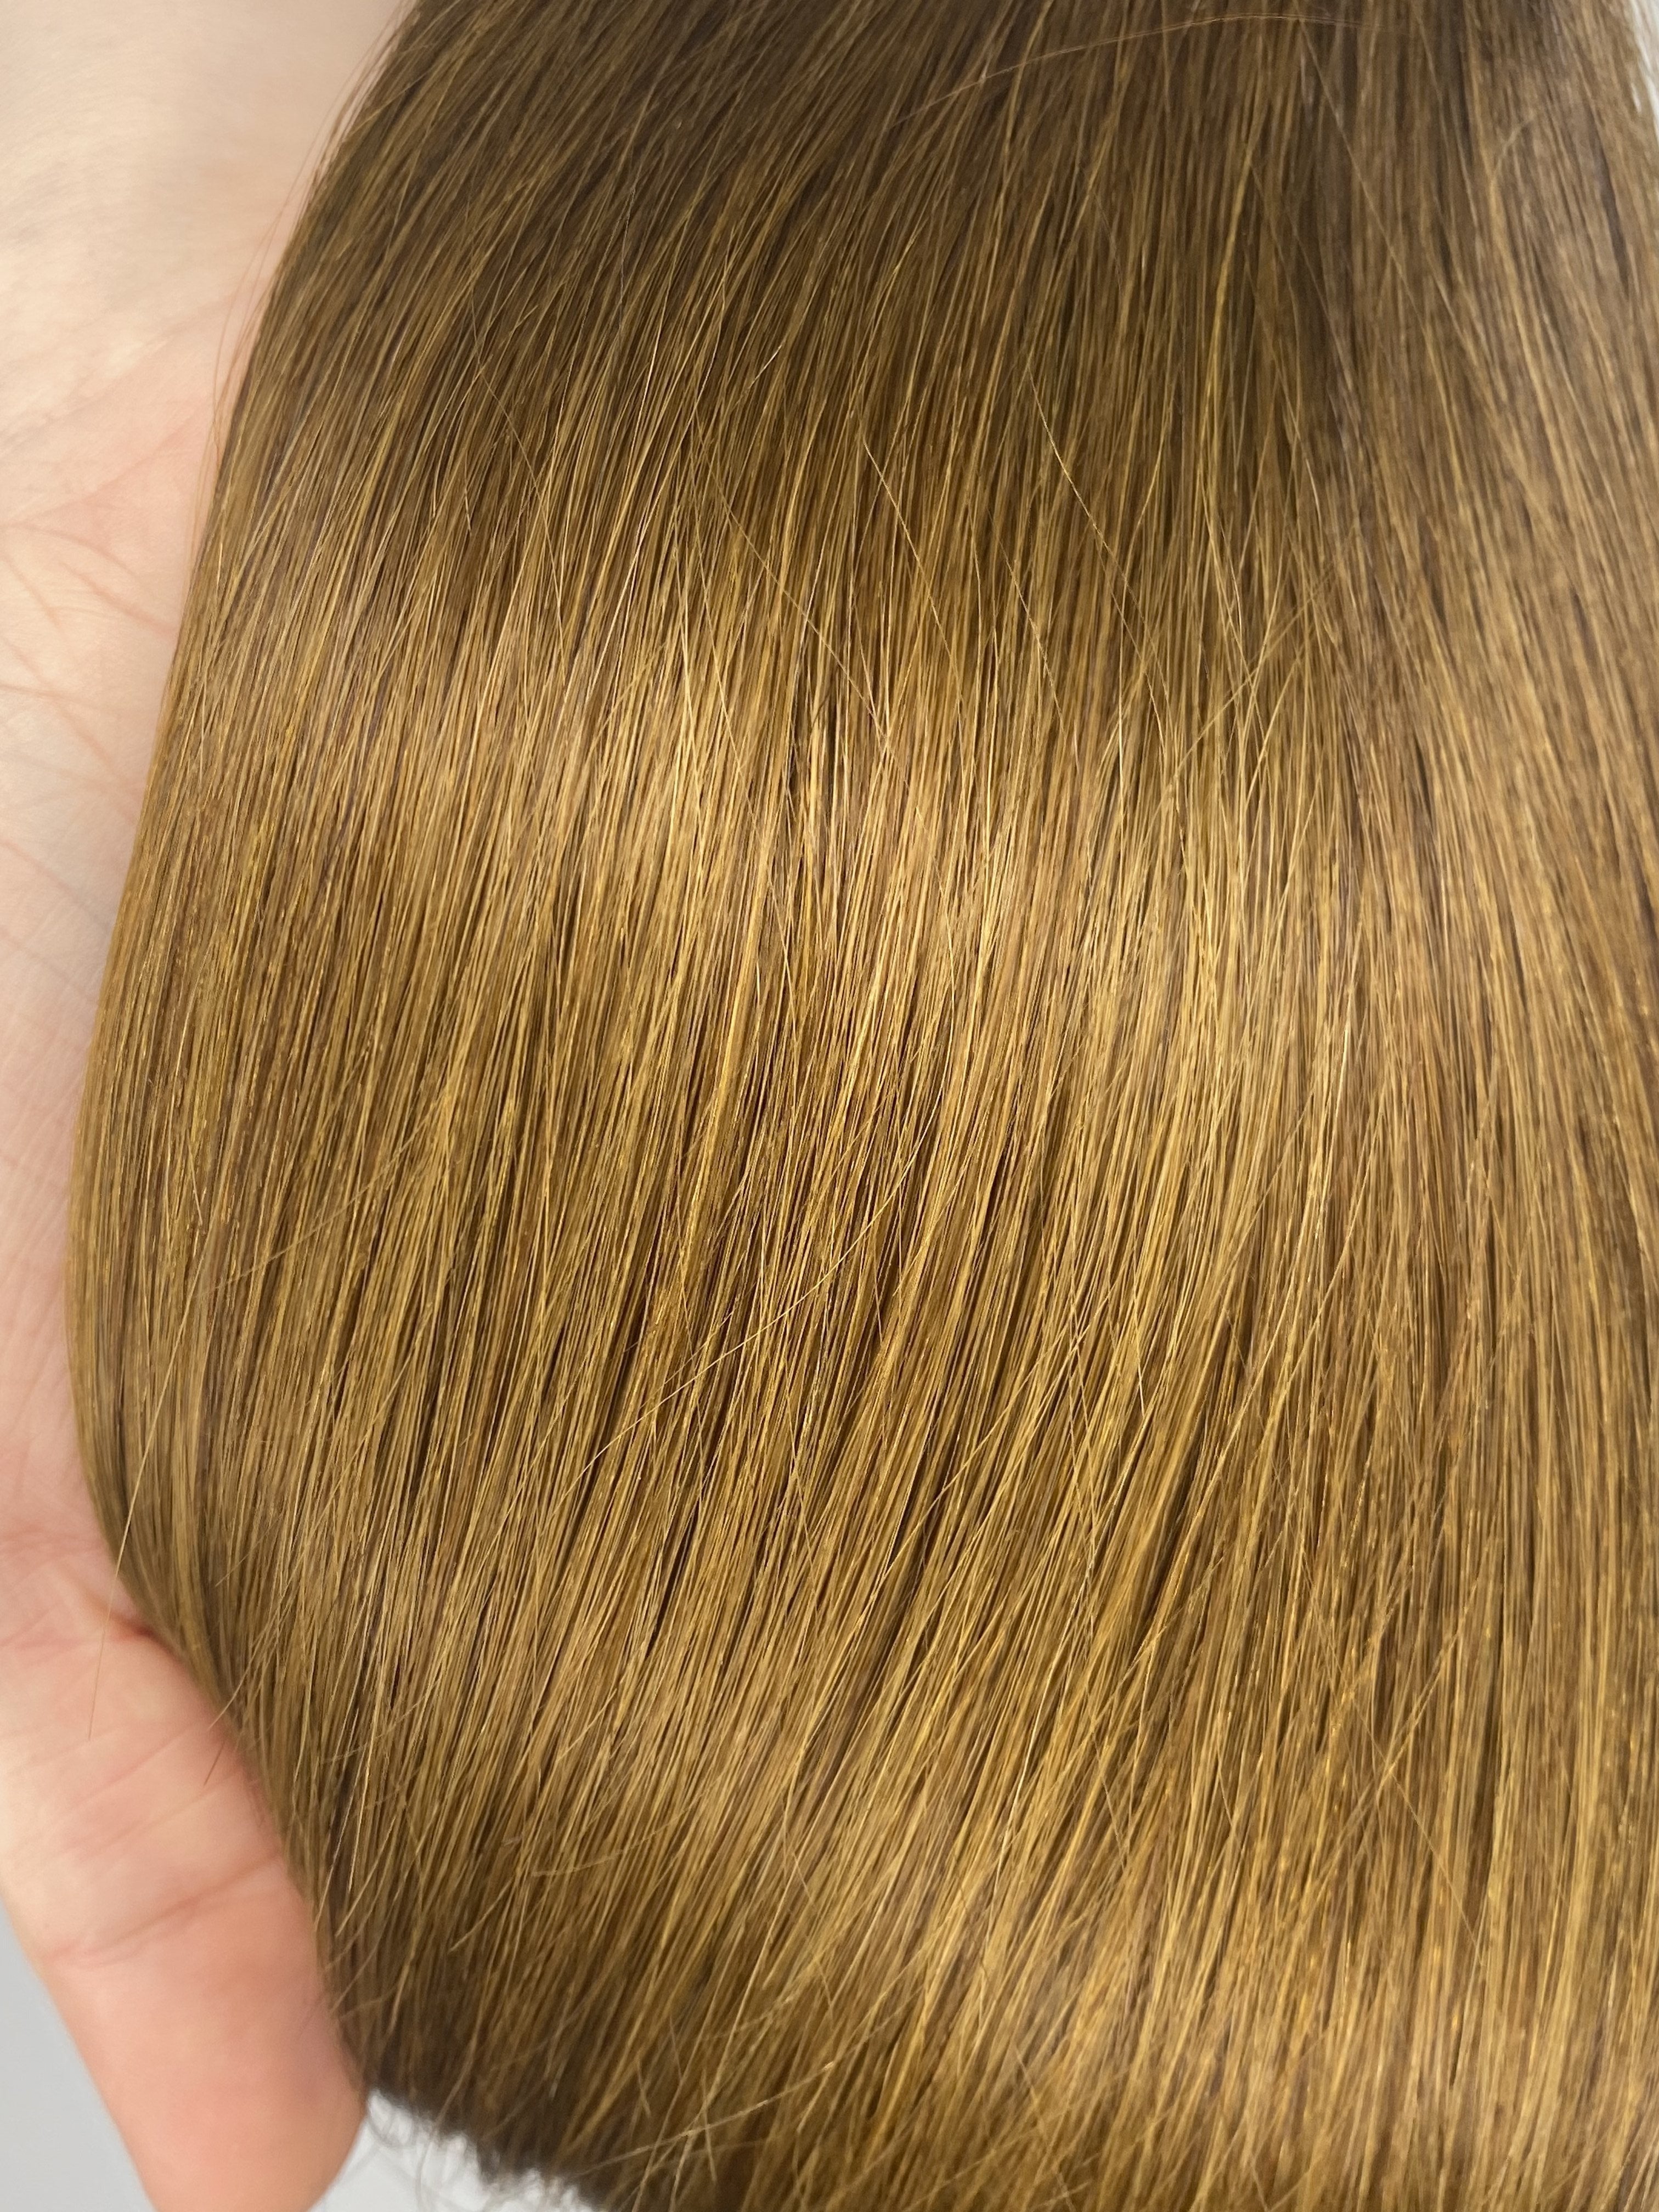 Velo Sale #2&27 - 20 inches - Chestnut into Copper Golden Light Blonde Ombre - Image 1